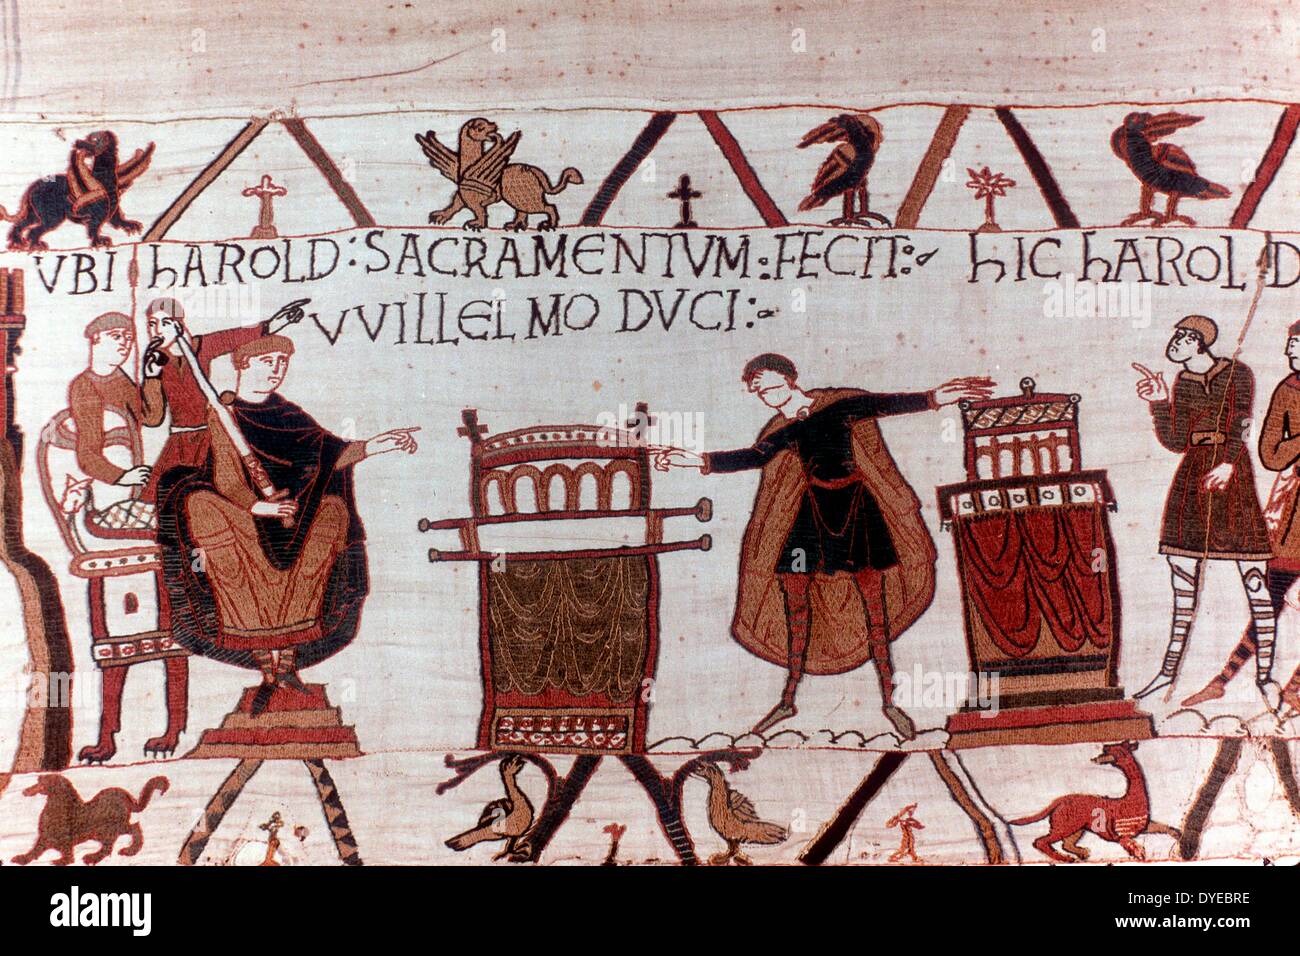 scene from the Bayeux Tapestry an embroidered cloth nearly 70 metres (230 ft) long, which depicts the events leading up to the Norman conquest of England concerning William, Duke of Normandy and Harold, Earl of Wessex, later King of England, and culminating in the Battle of Hastings in 1066 Stock Photo